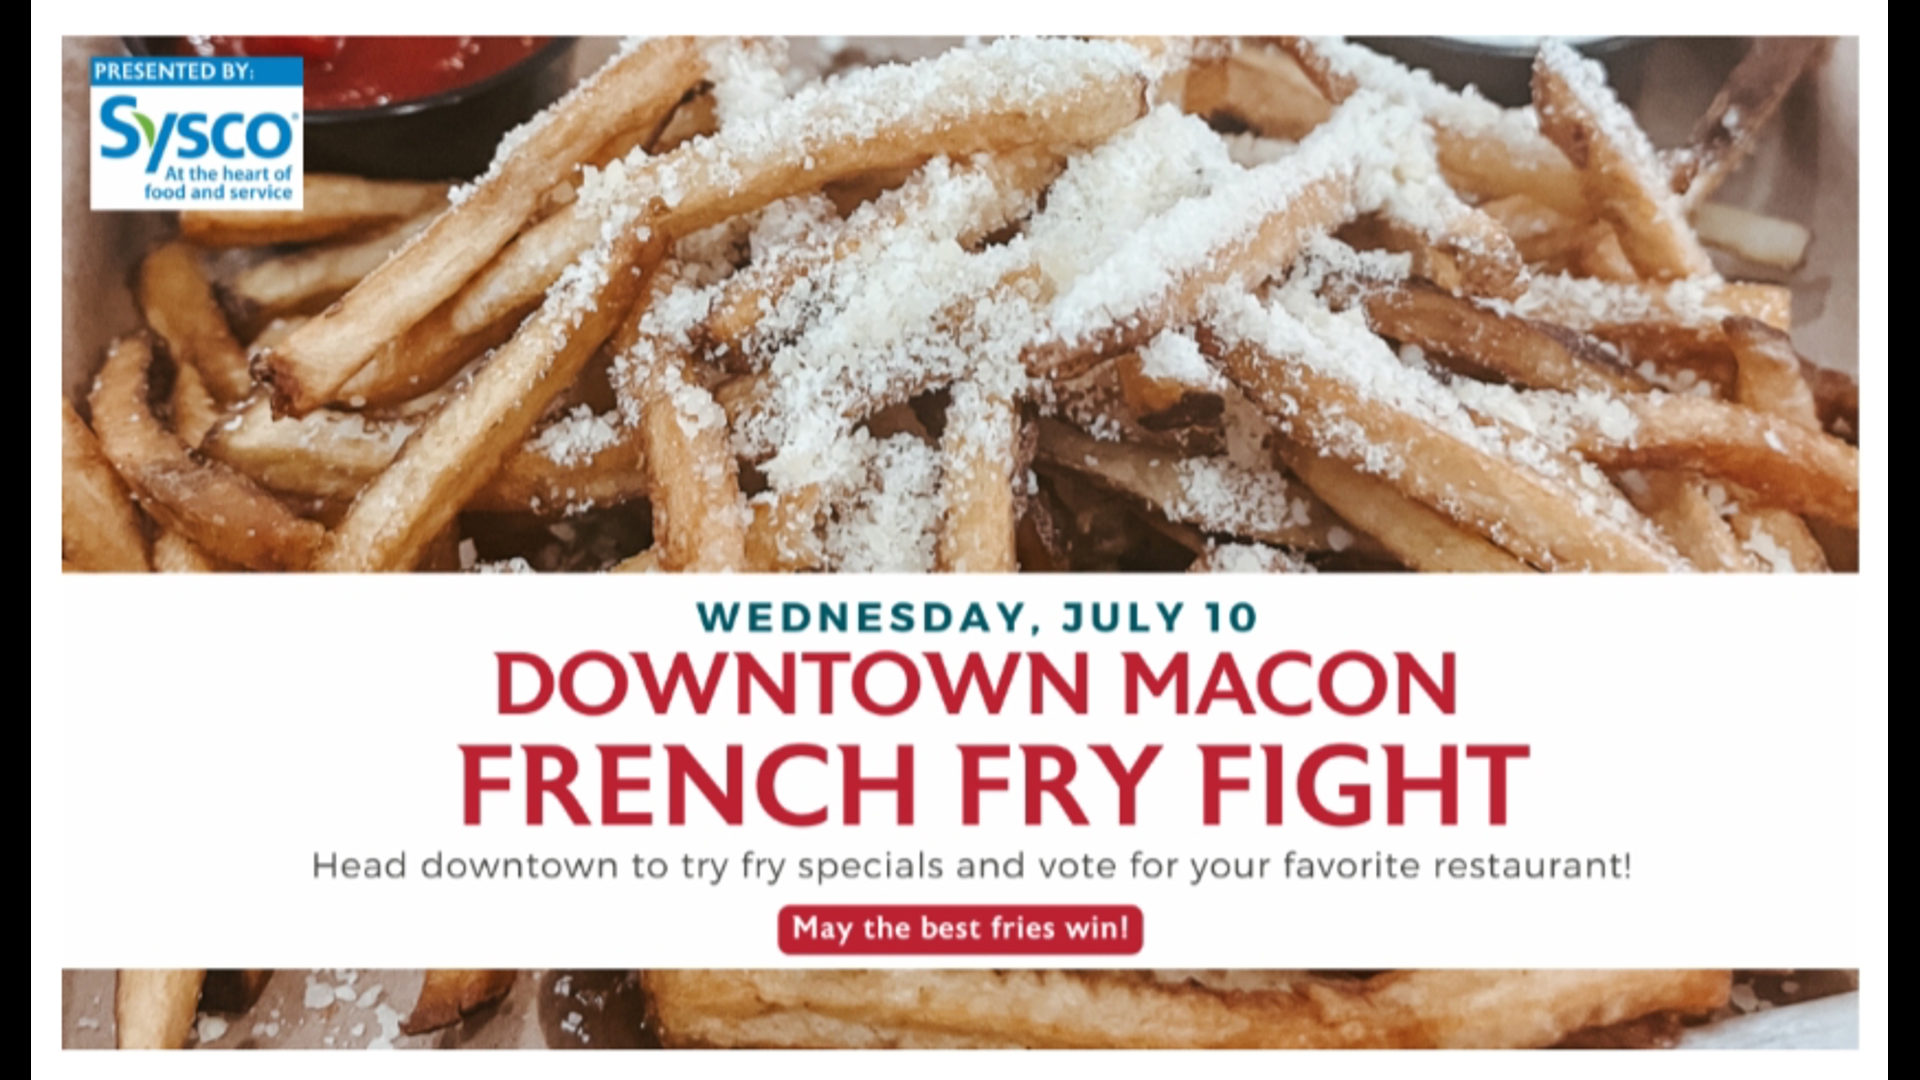 The third-ever Downtown Macon French Fry Fight is on Wednesday, July 10 in honor of National Fry Day.